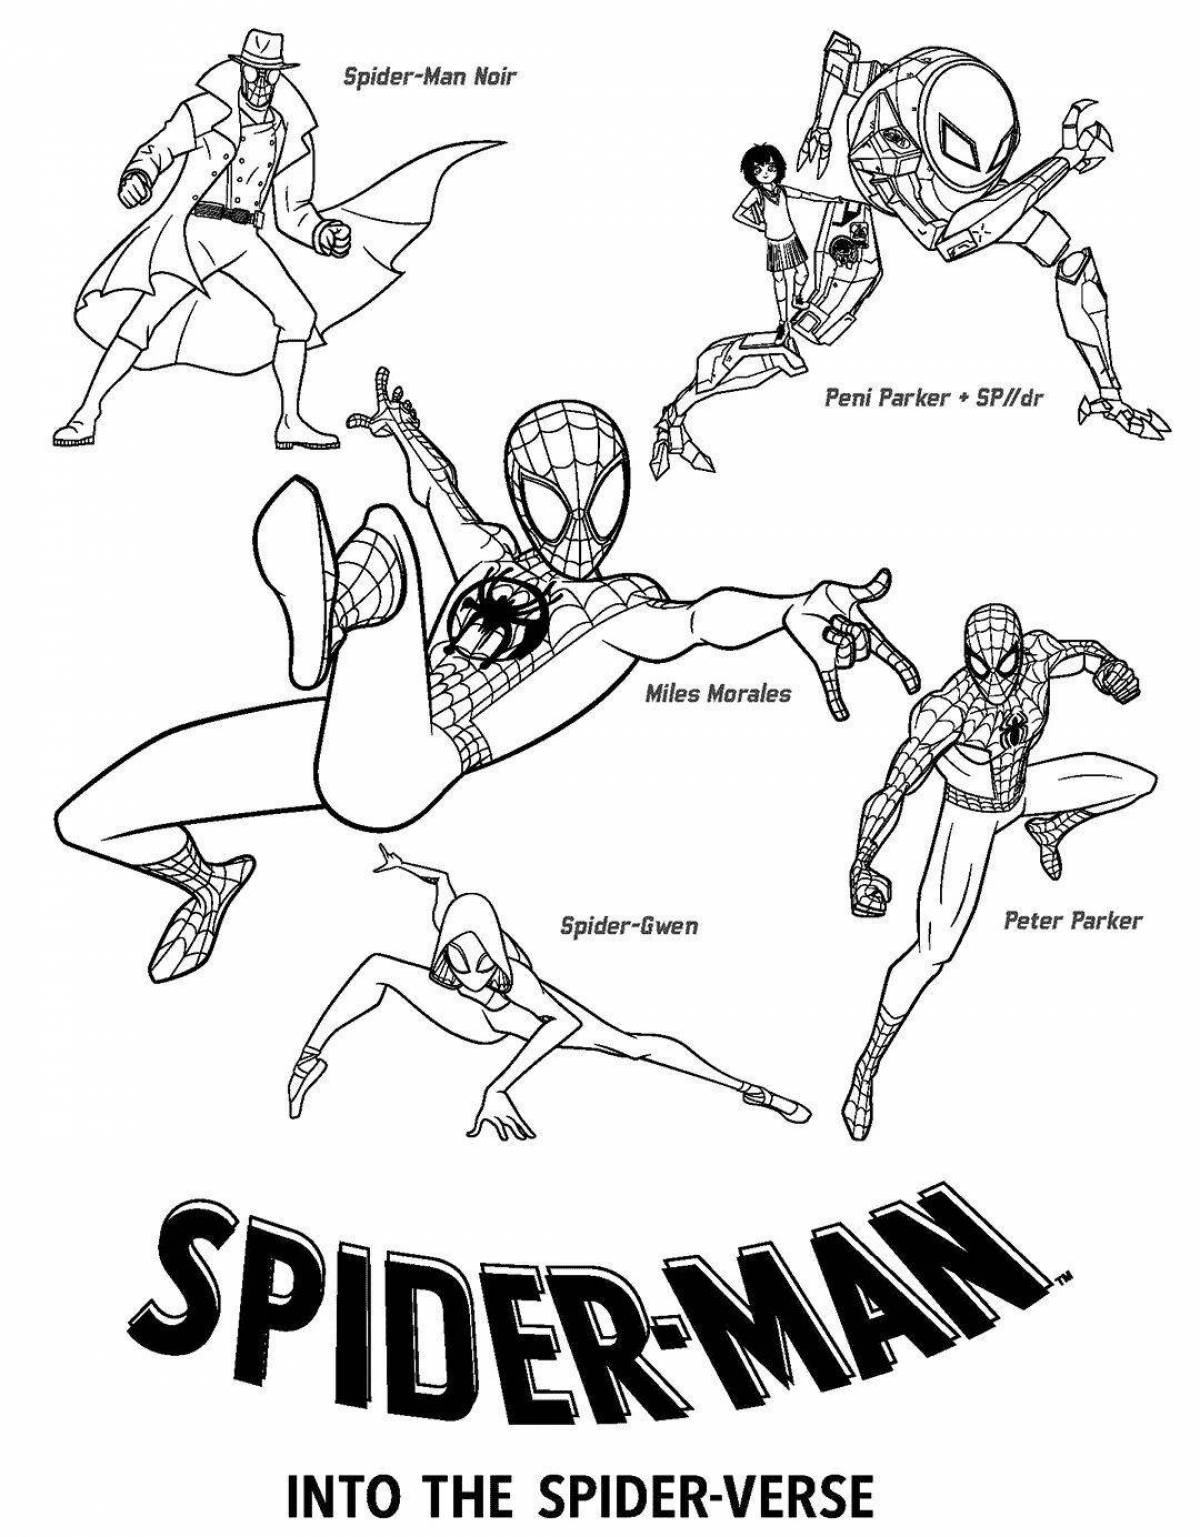 Spiderman's mesmerizing coloring book